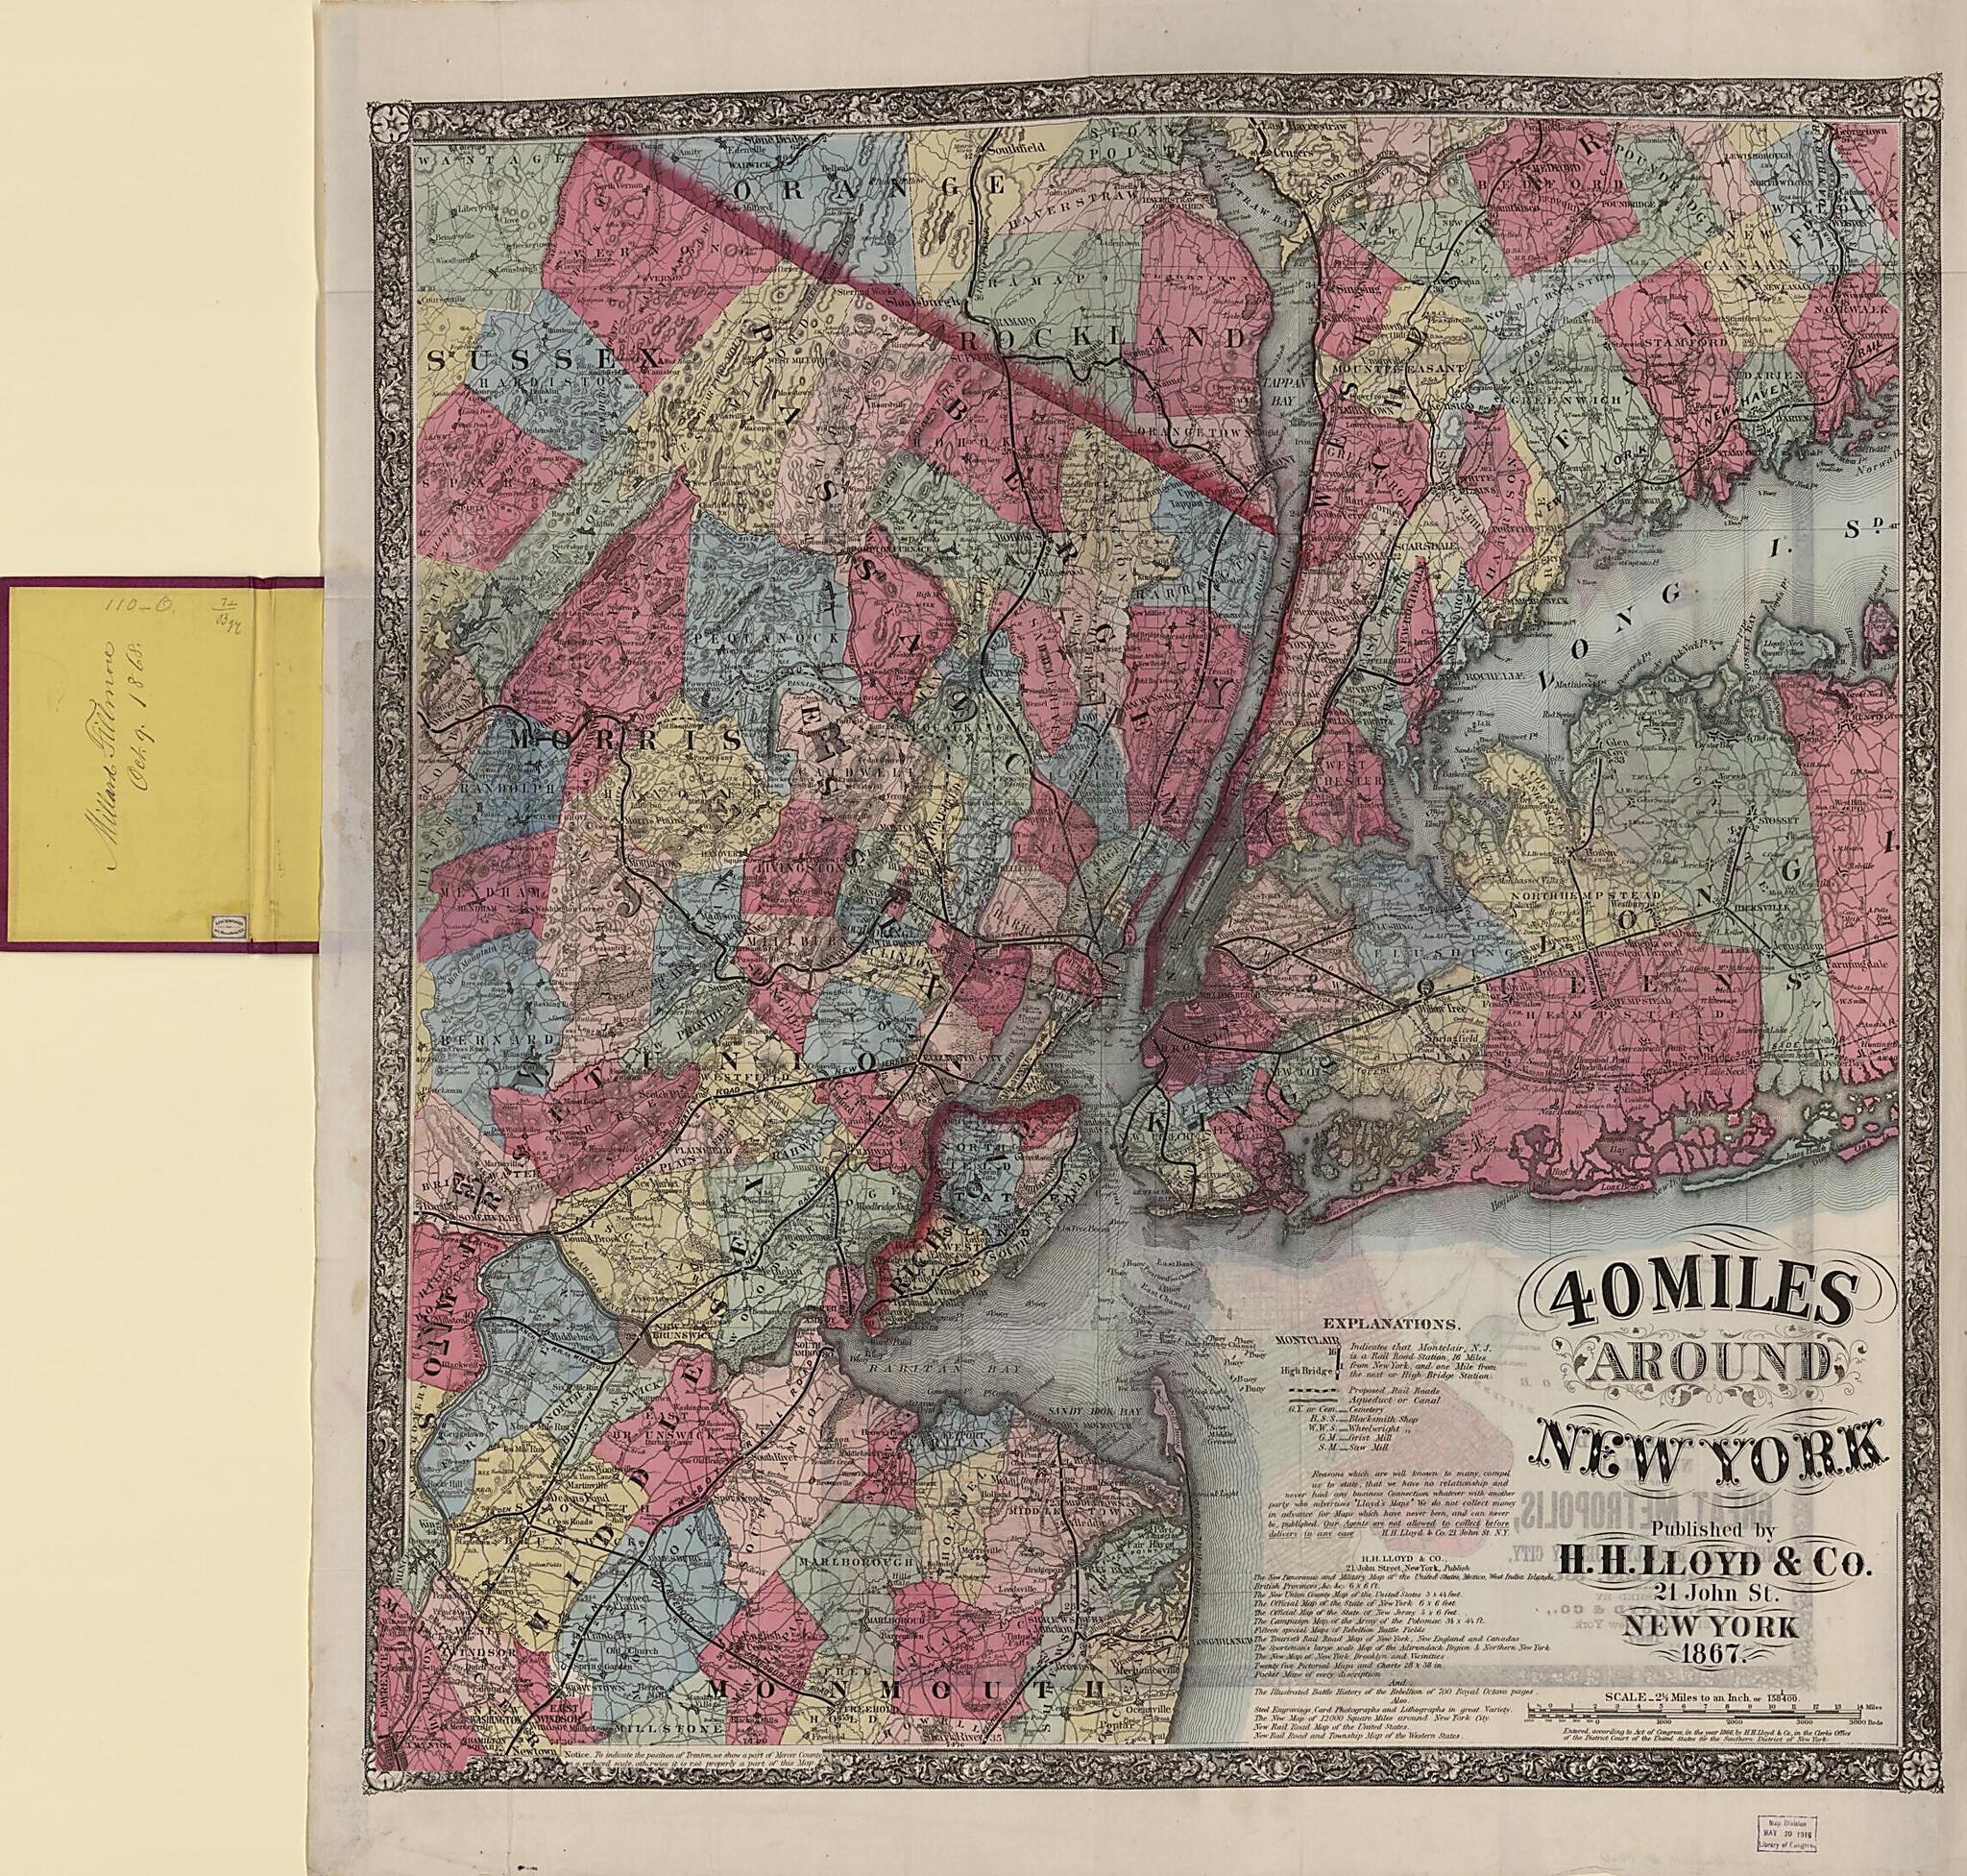 This old map of 40 Miles Around New York (Forty Miles Around New York, H.H. Lloyd&